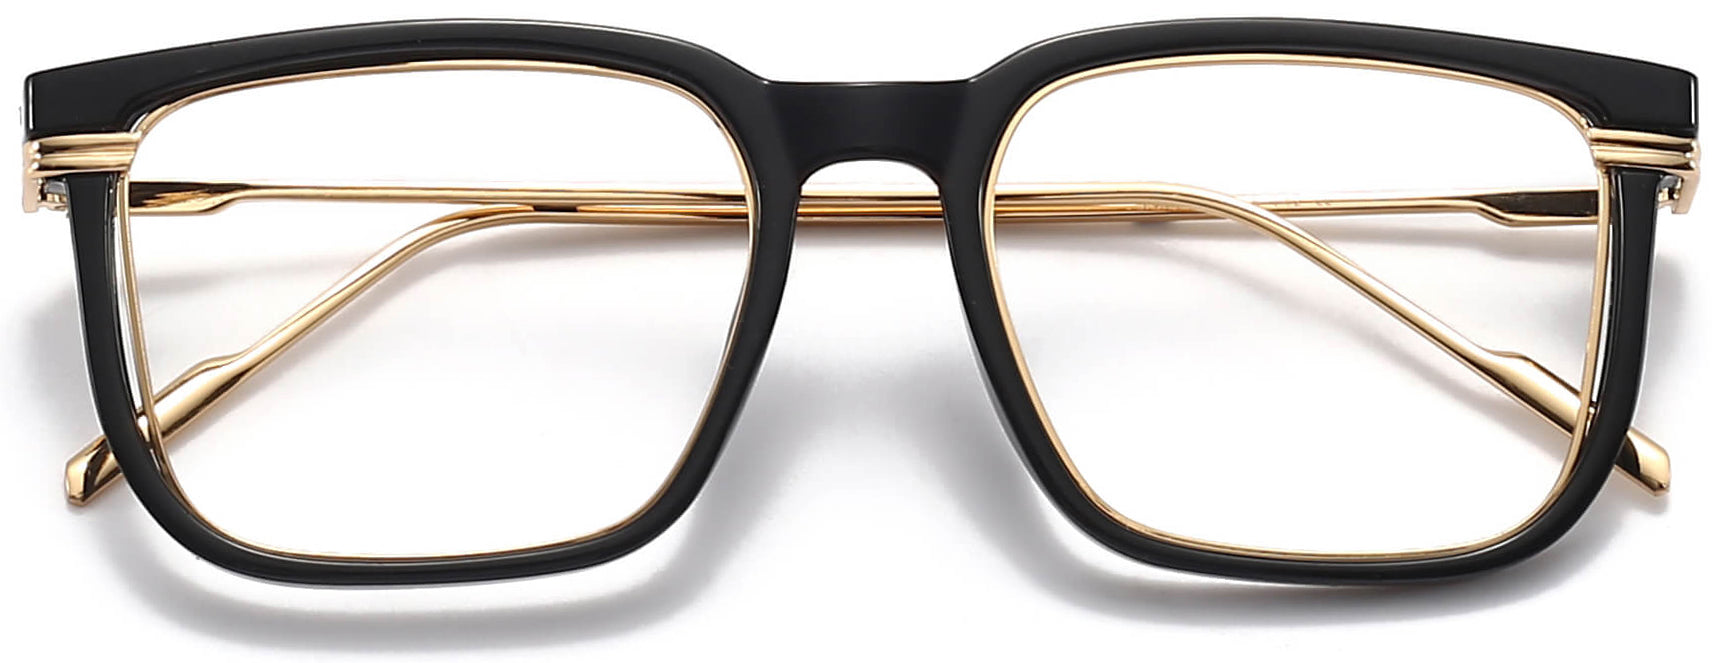 Pearl Square Black Eyeglasses from ANRRI, closed view